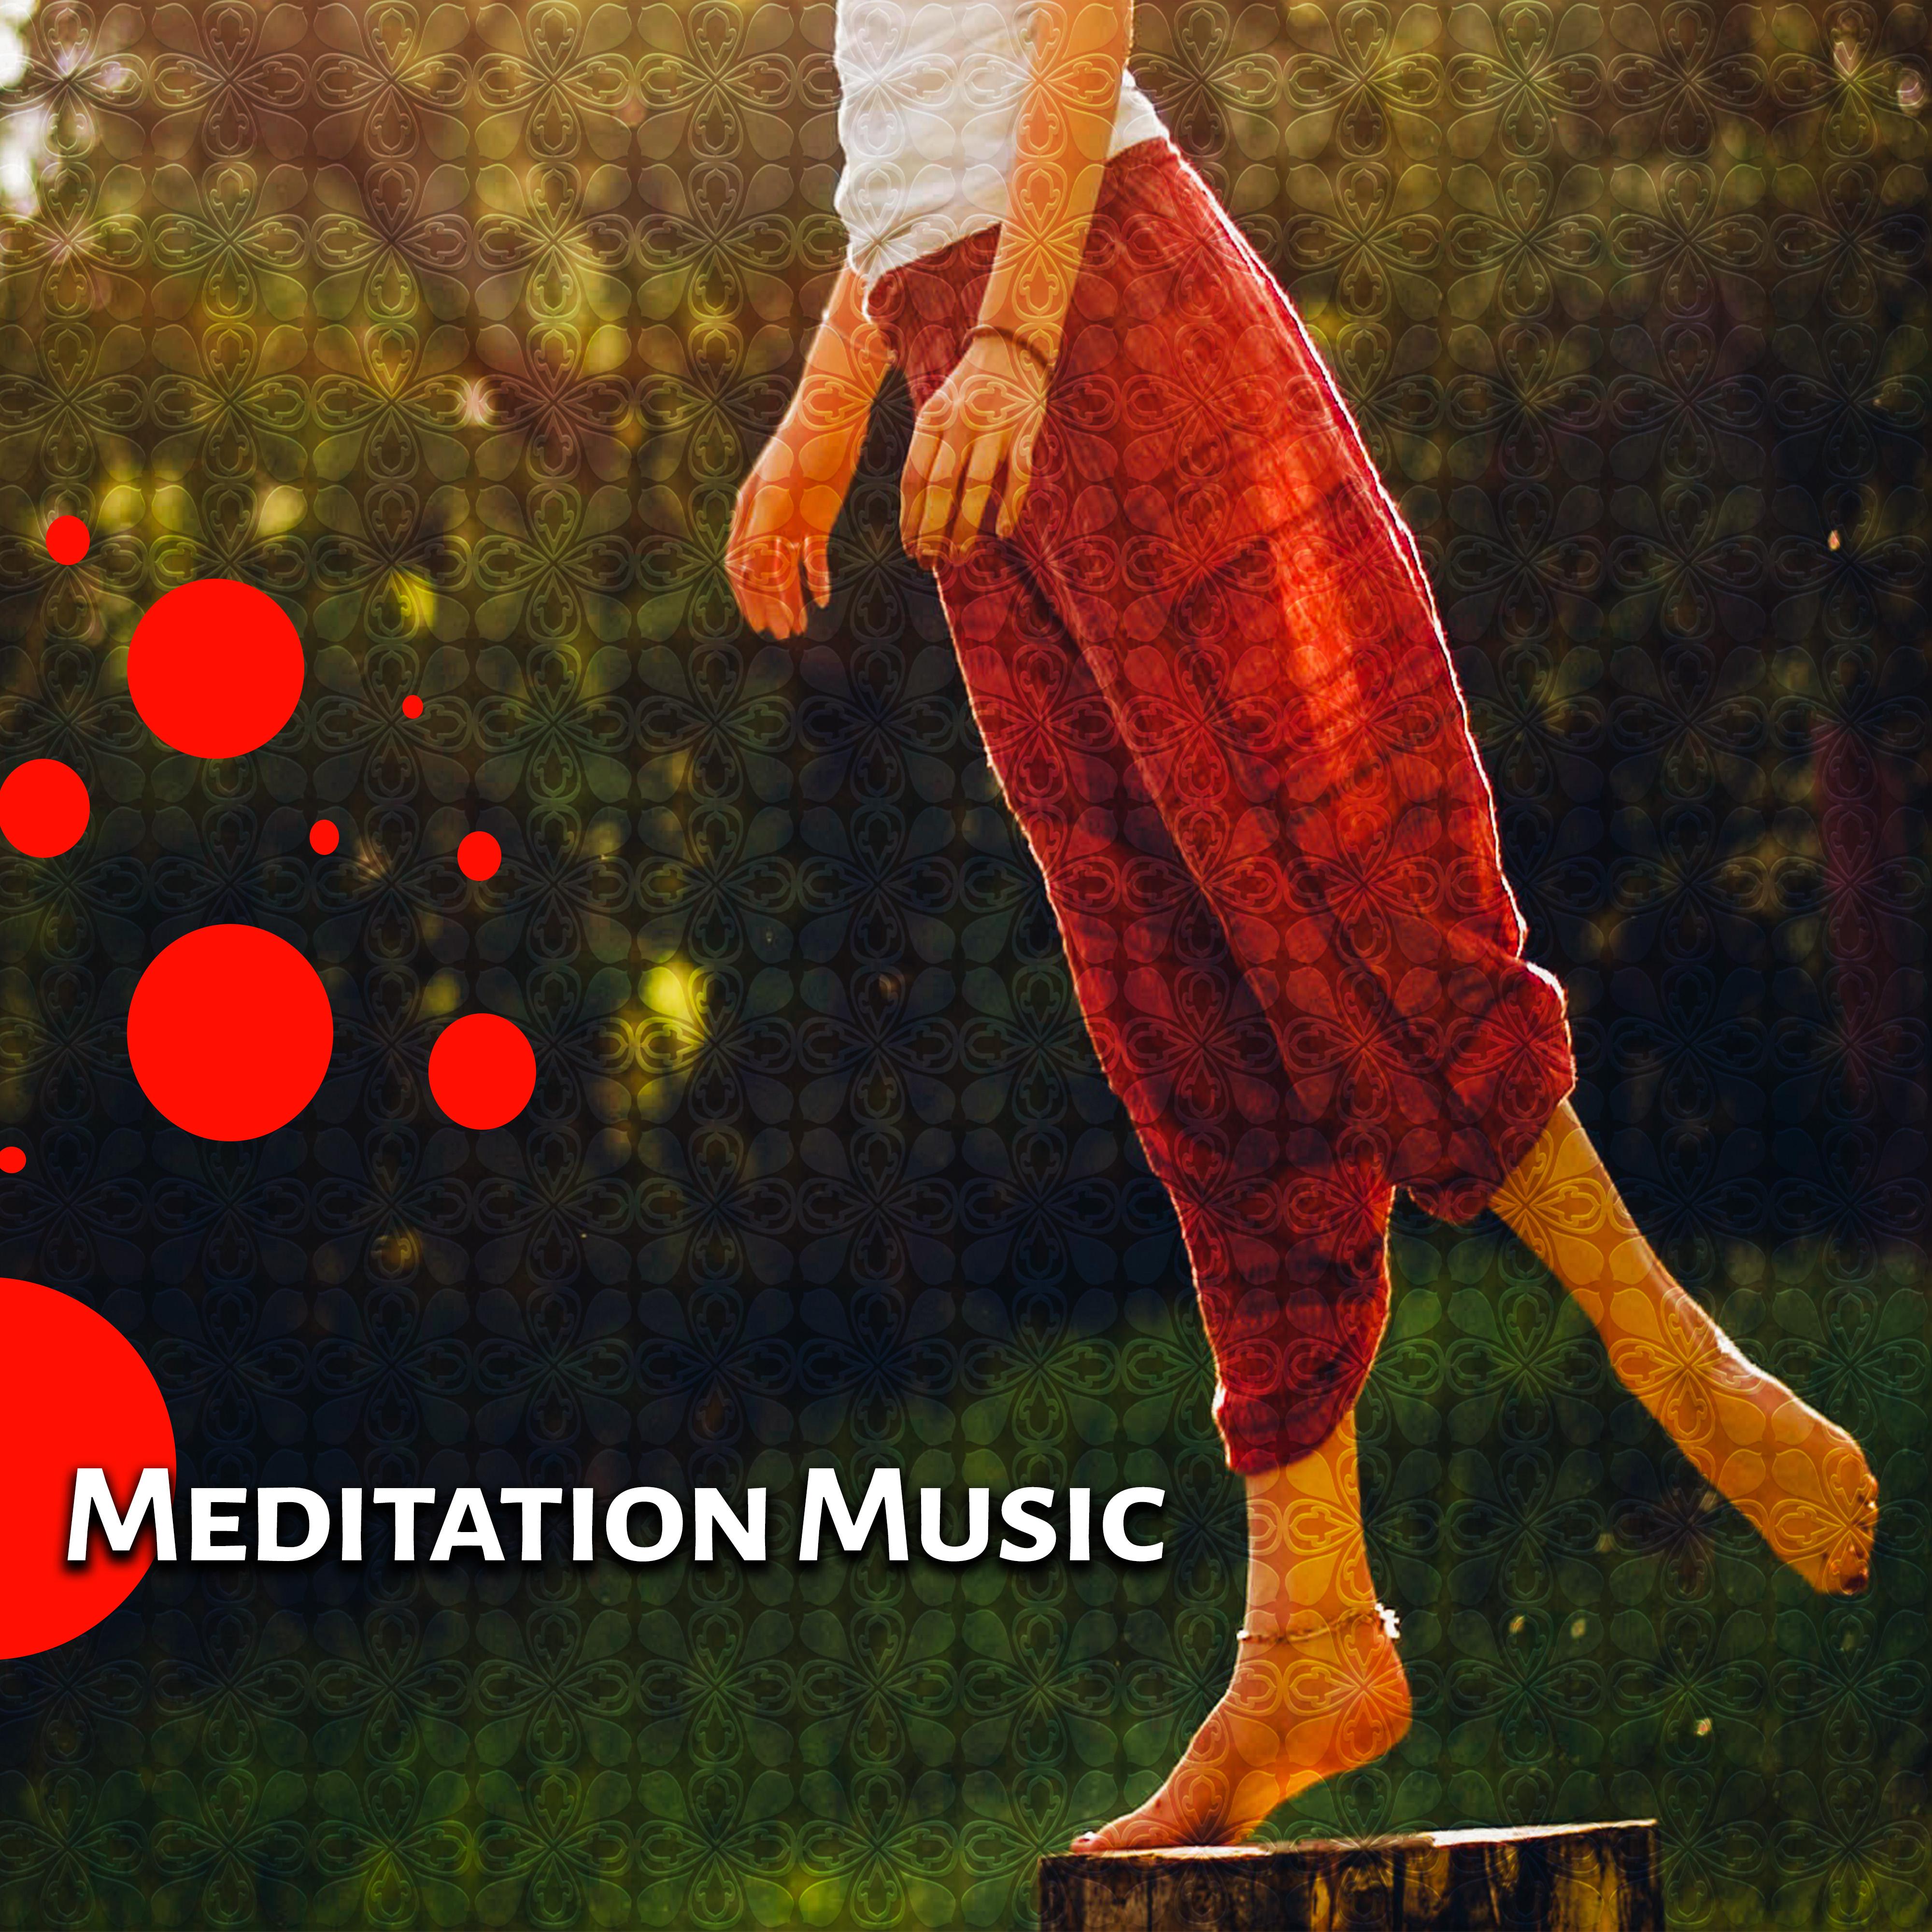 Meditation Music – Yoga Therapy, Inner Peace, Sounds of Nature for Relaxation, Deep Concentration